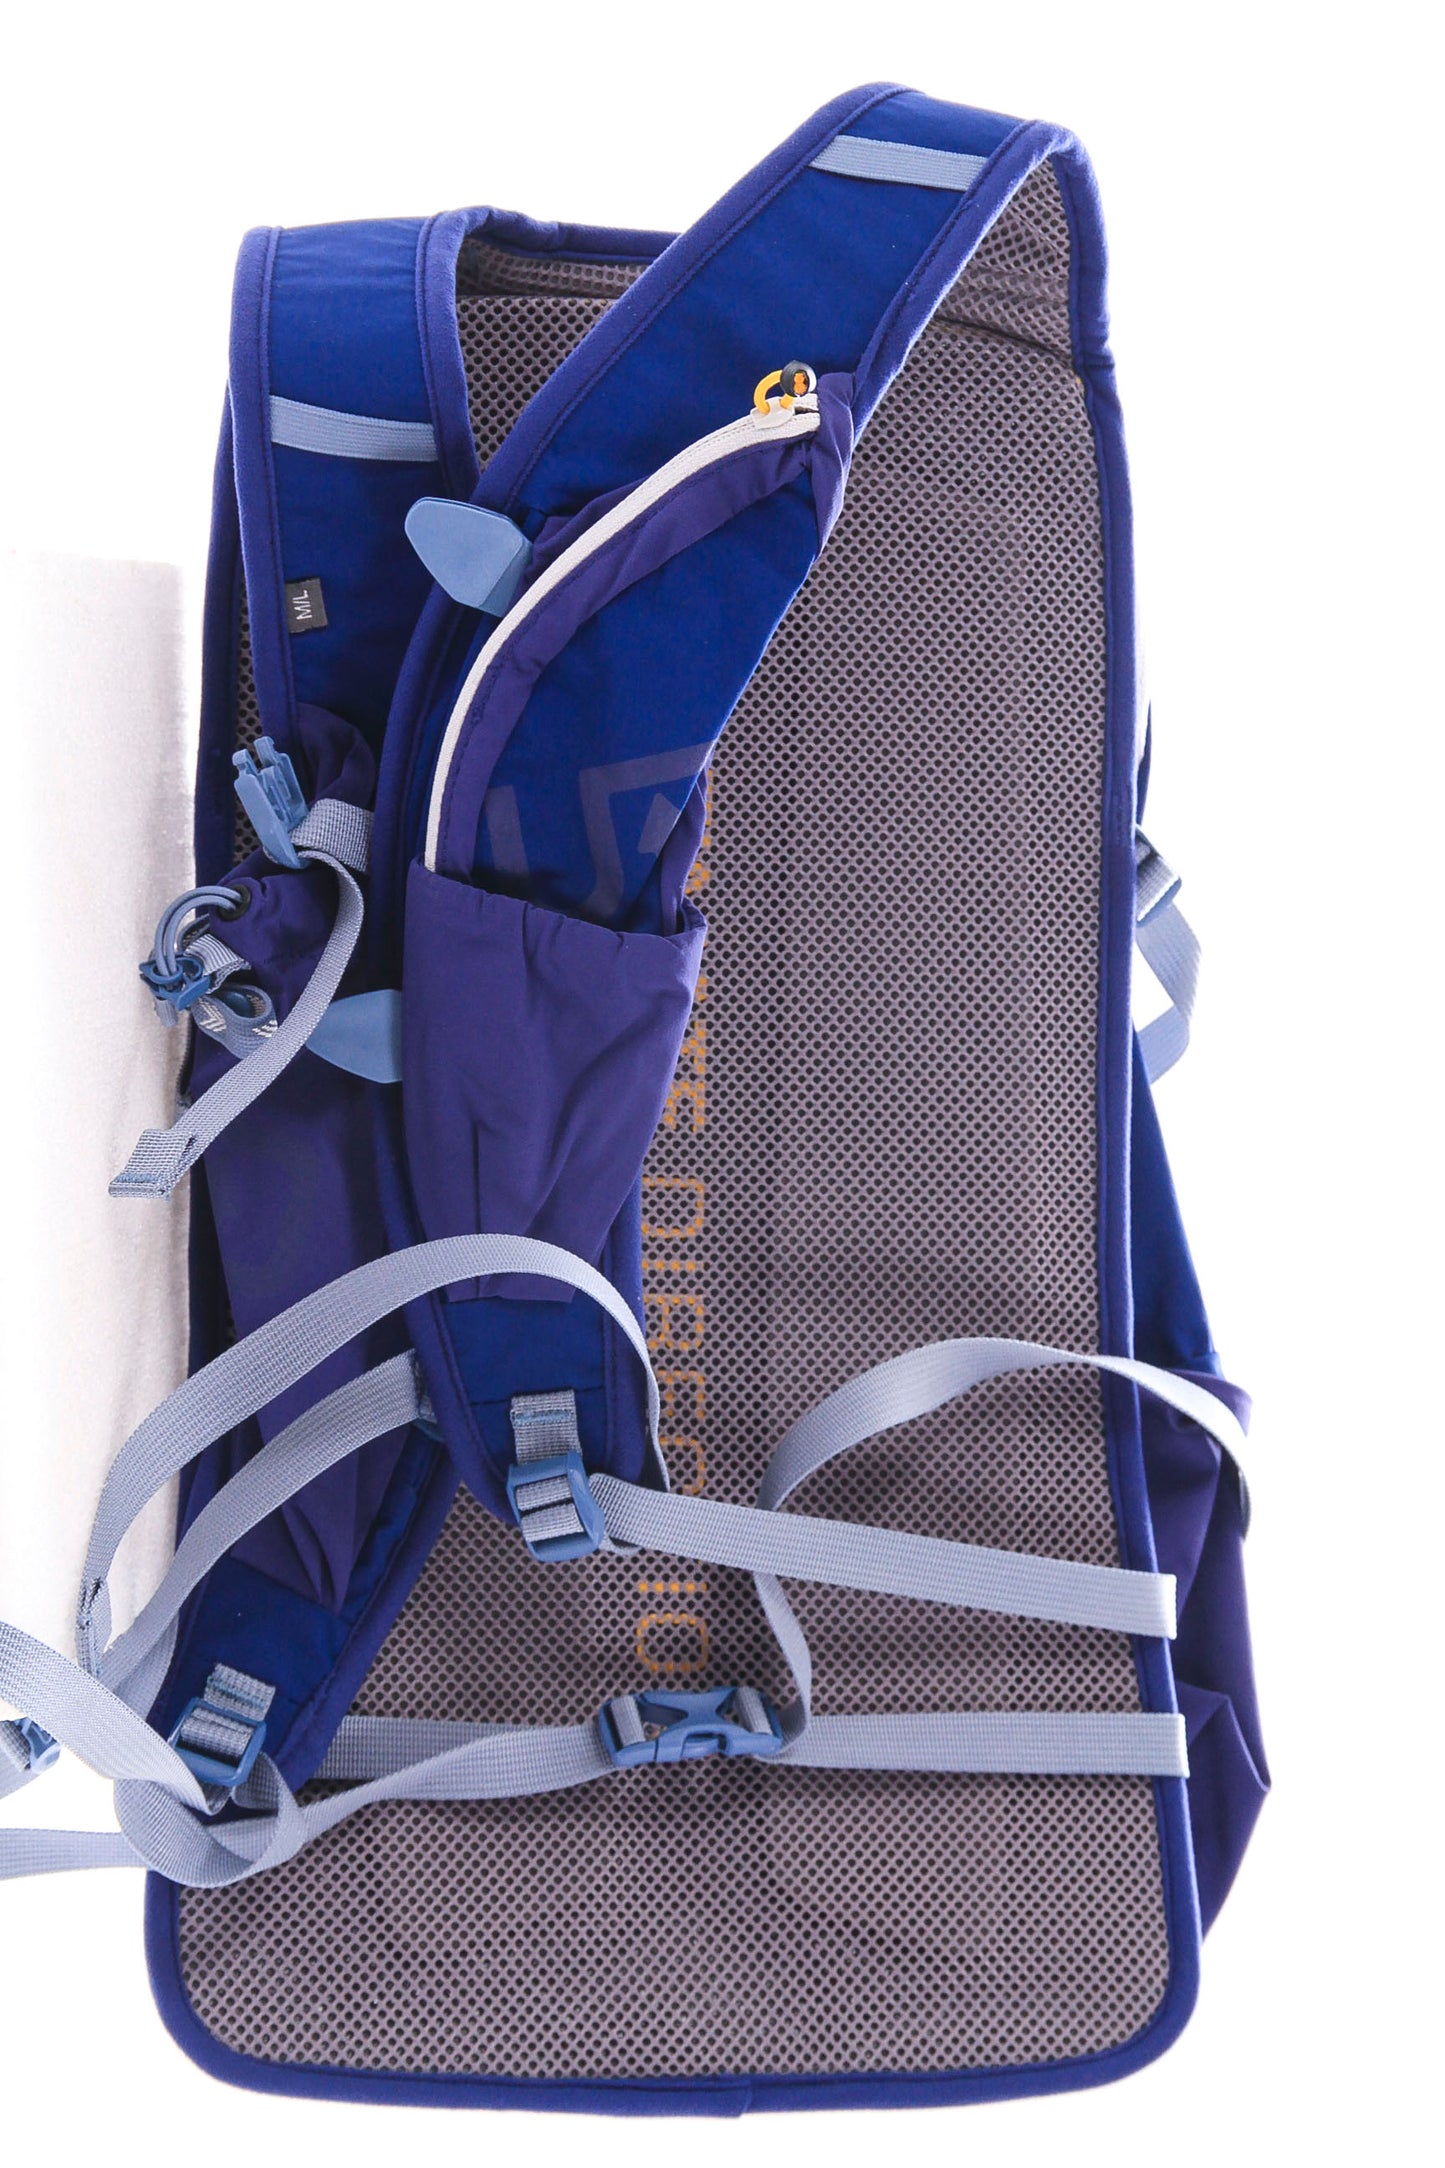 NEW (without tags) Ultimate Direction Hike Pack 18L M/L Royal Blue Backpack